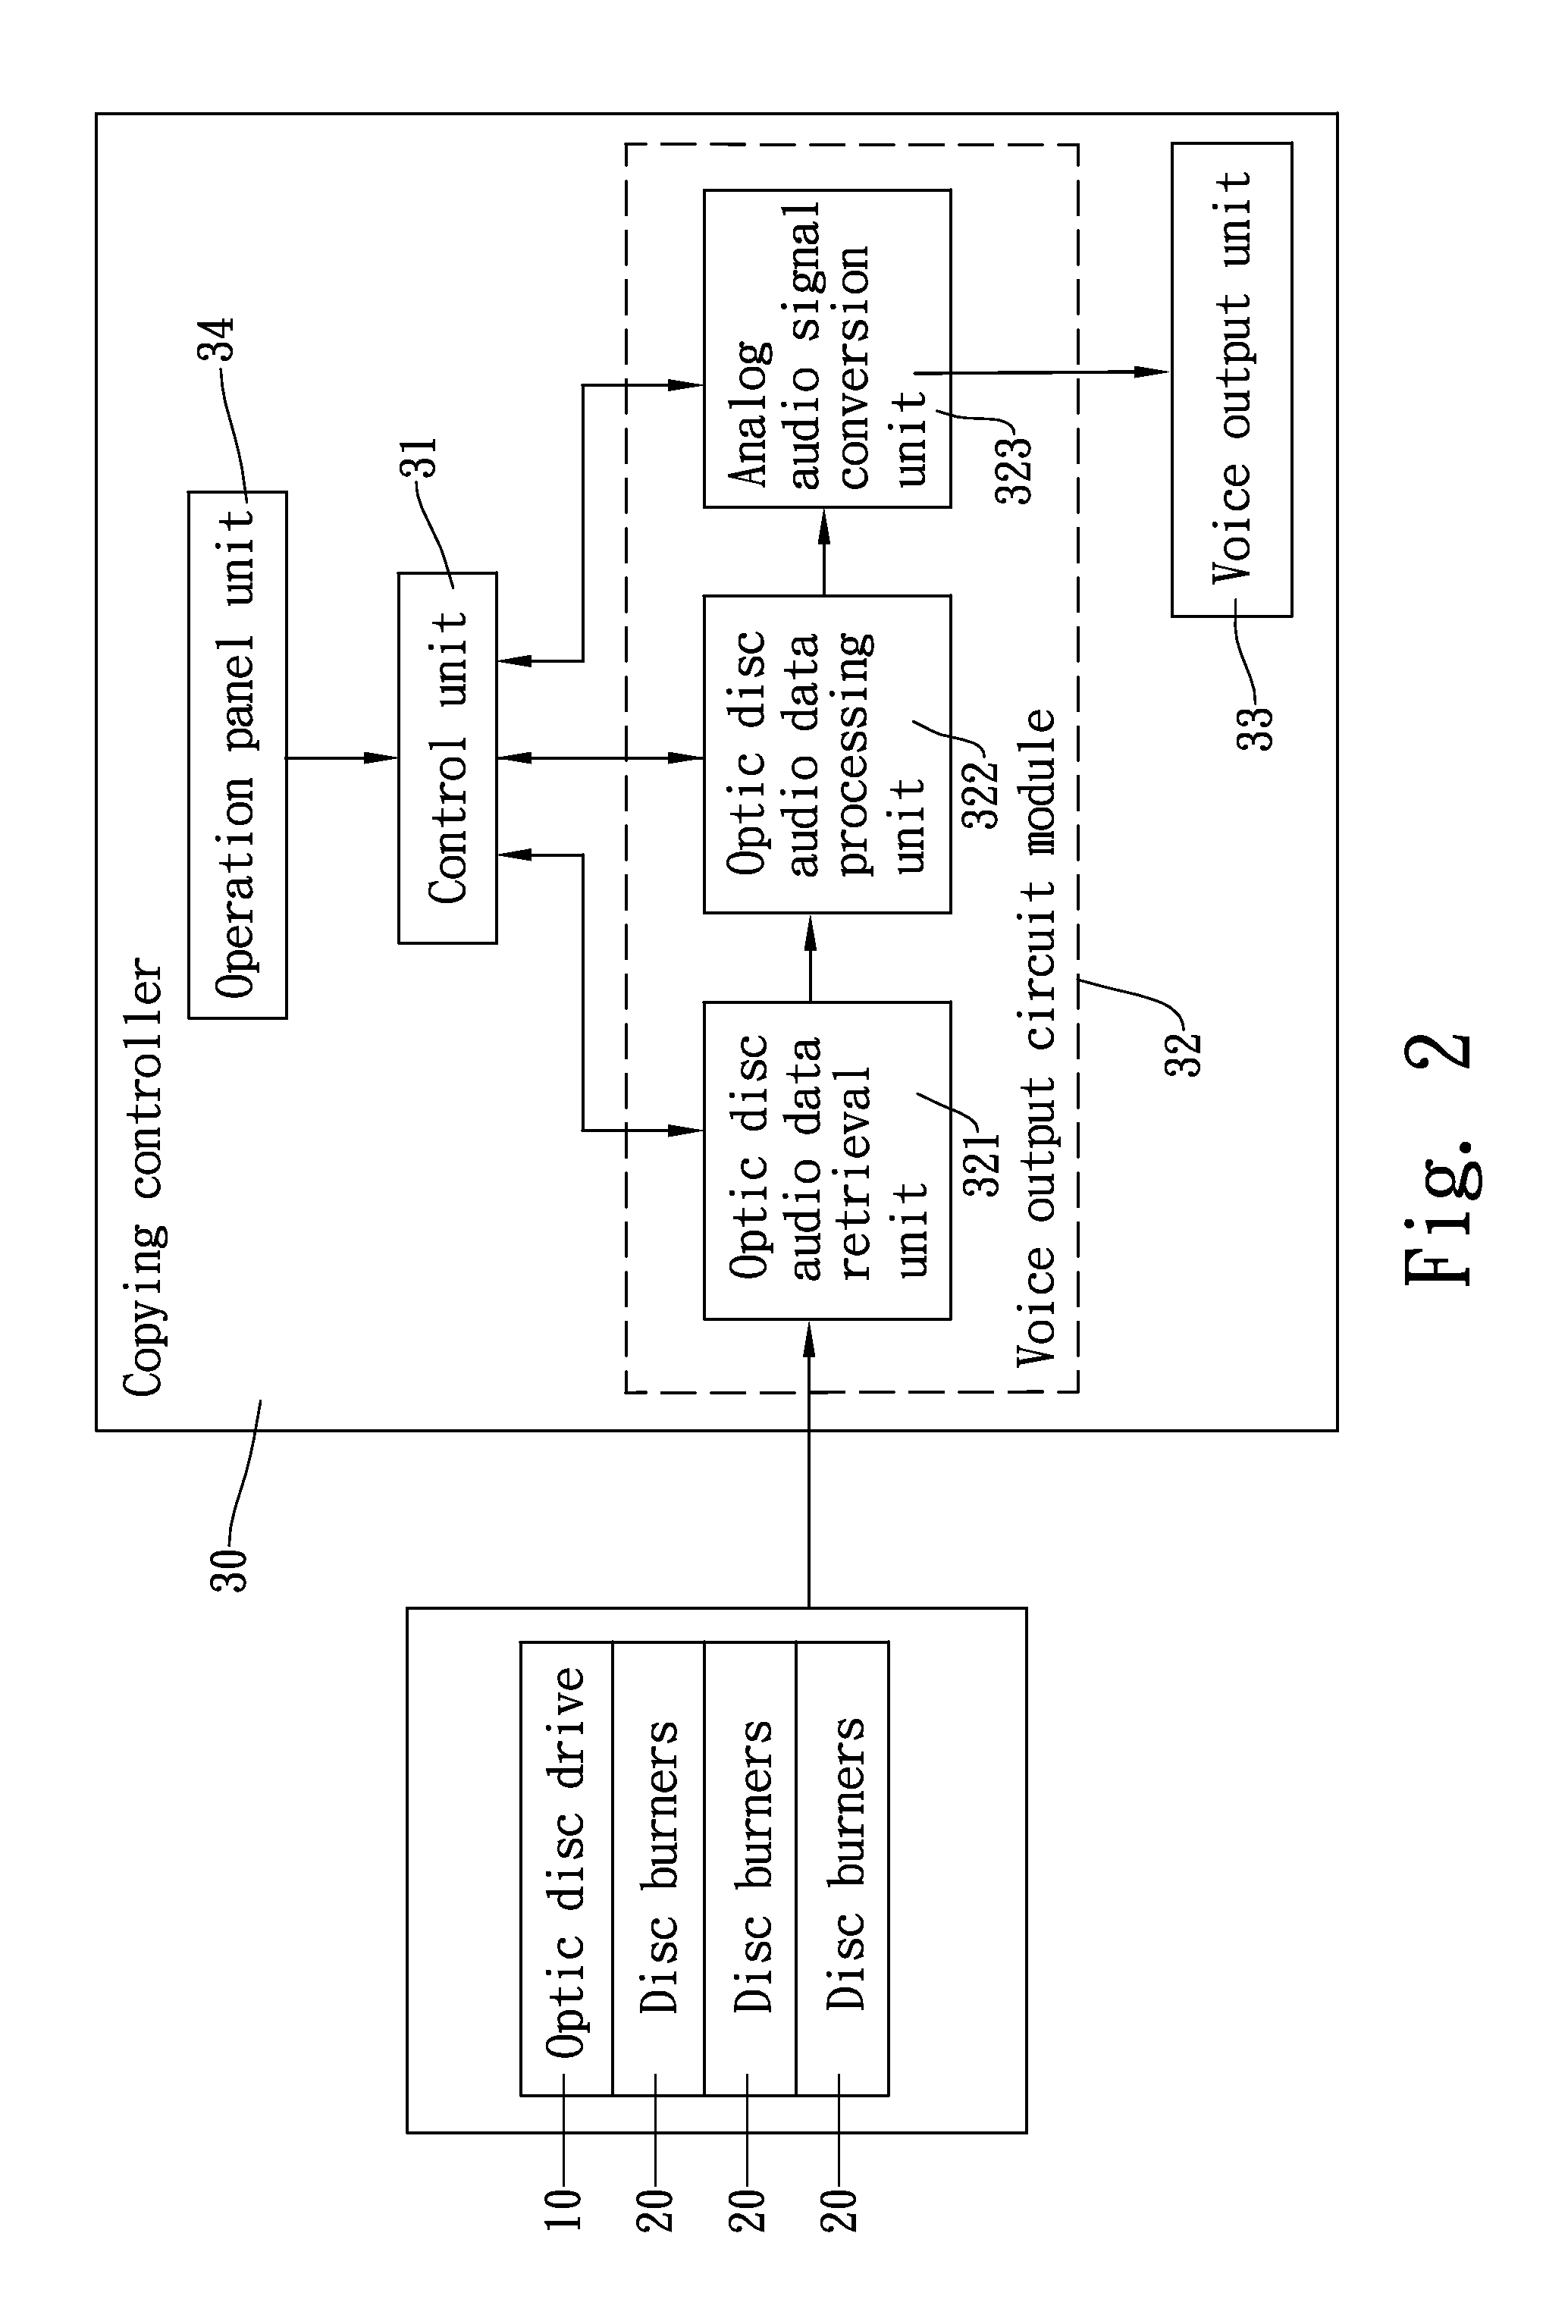 Optic disc copying device with voice output